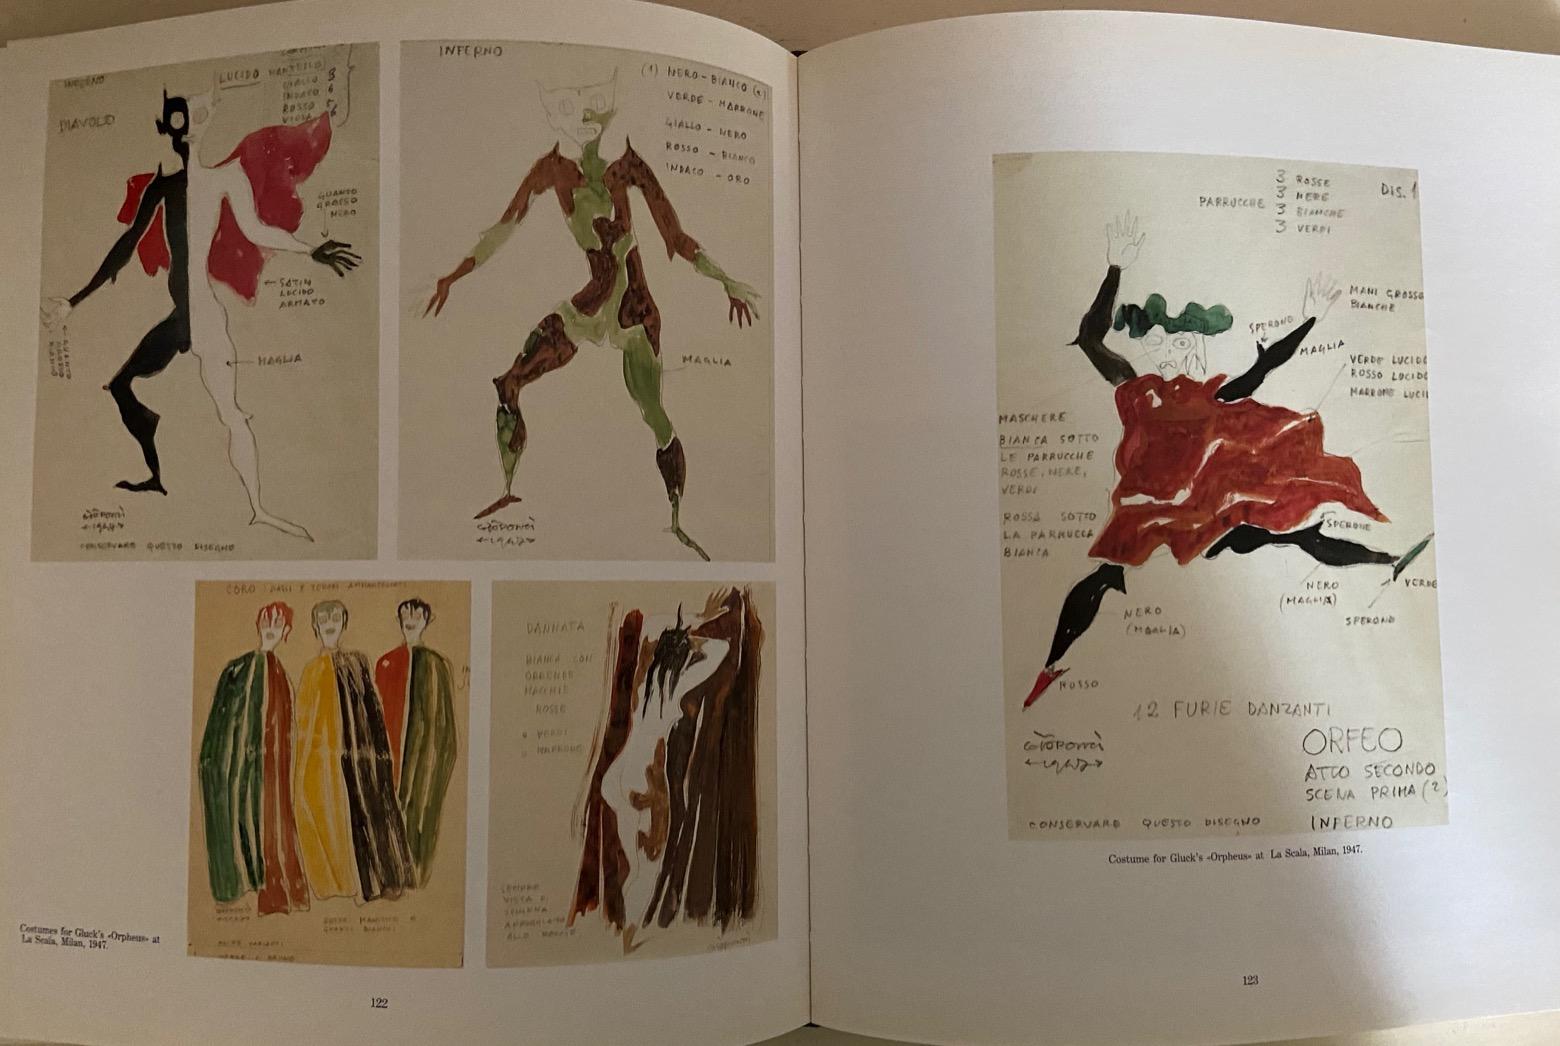 Paper Gio Ponti, The Complete Work 1923-1978,  hardback book, 1990, Thames and Hudson For Sale